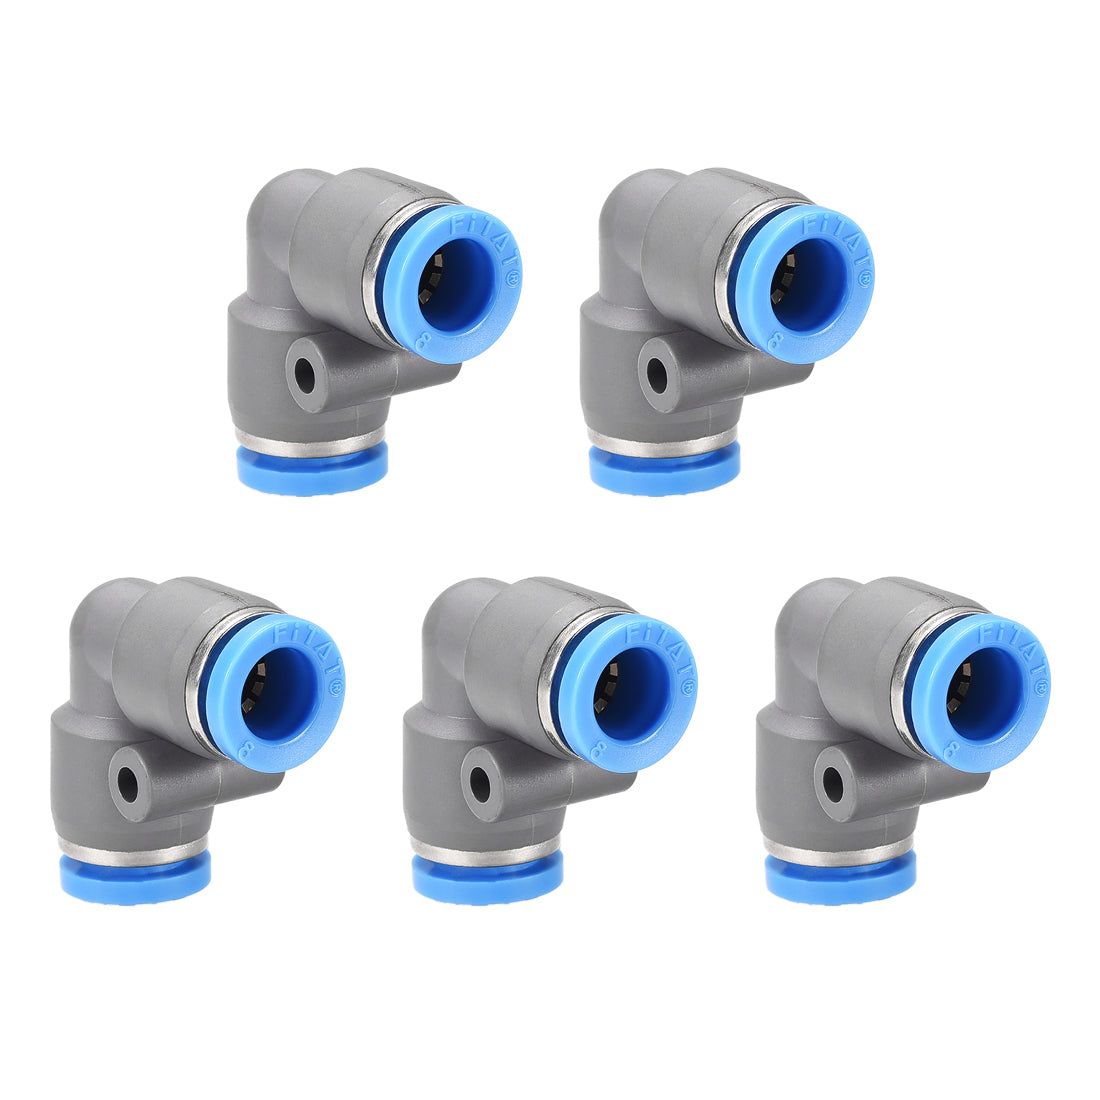 Uxcell Uxcell Elbow Push to Connect Air Fittings 6mm Tube OD Pneumatic Quick Release Connectors Grey 5Pcs